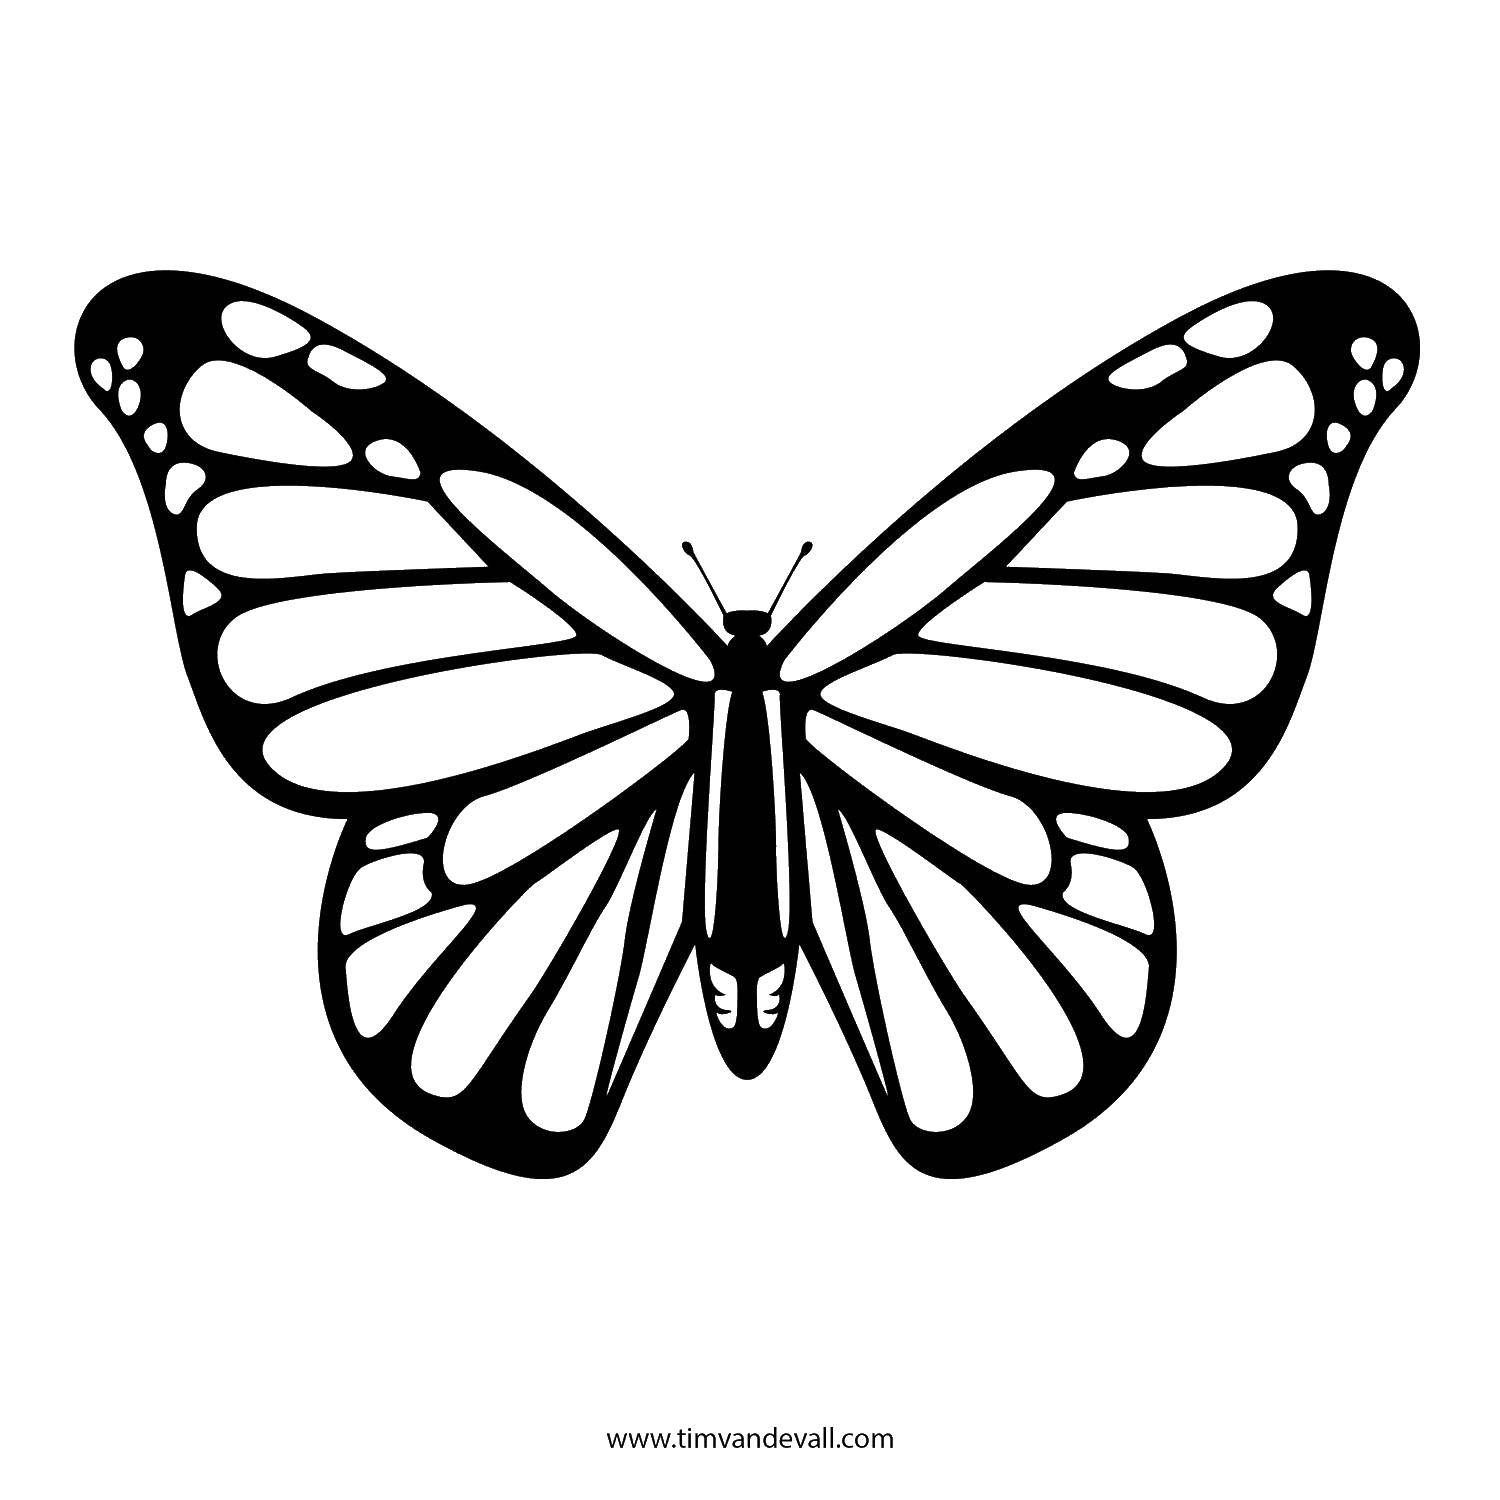 Coloring Butterfly wings. Category butterflies. Tags:  insects, butterfly.